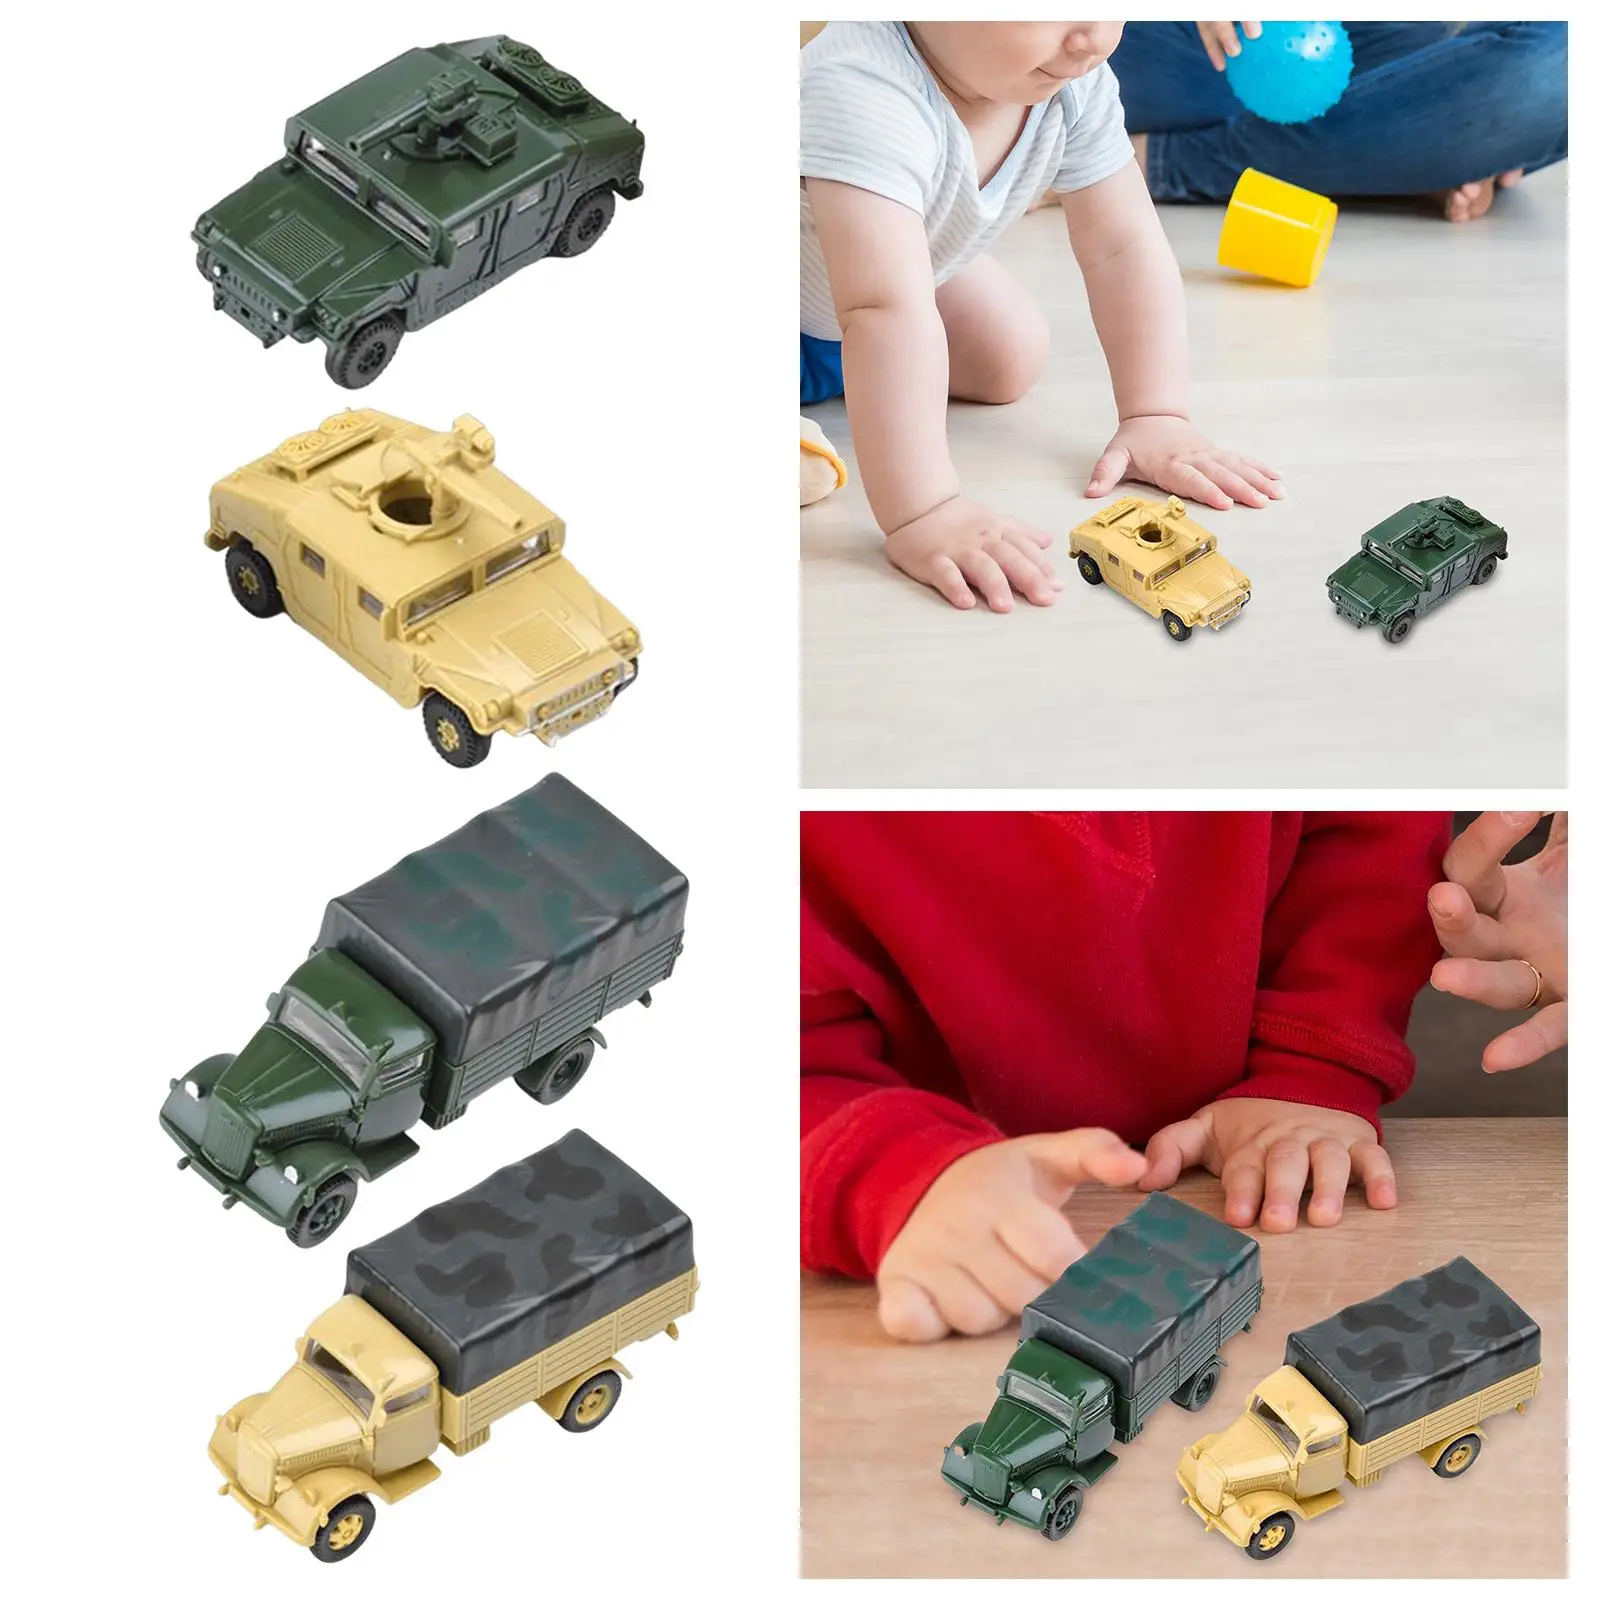 2x 1/72 Vehicle Model Kits Miniature Puzzle DIY Assemble for Display Educational Toy